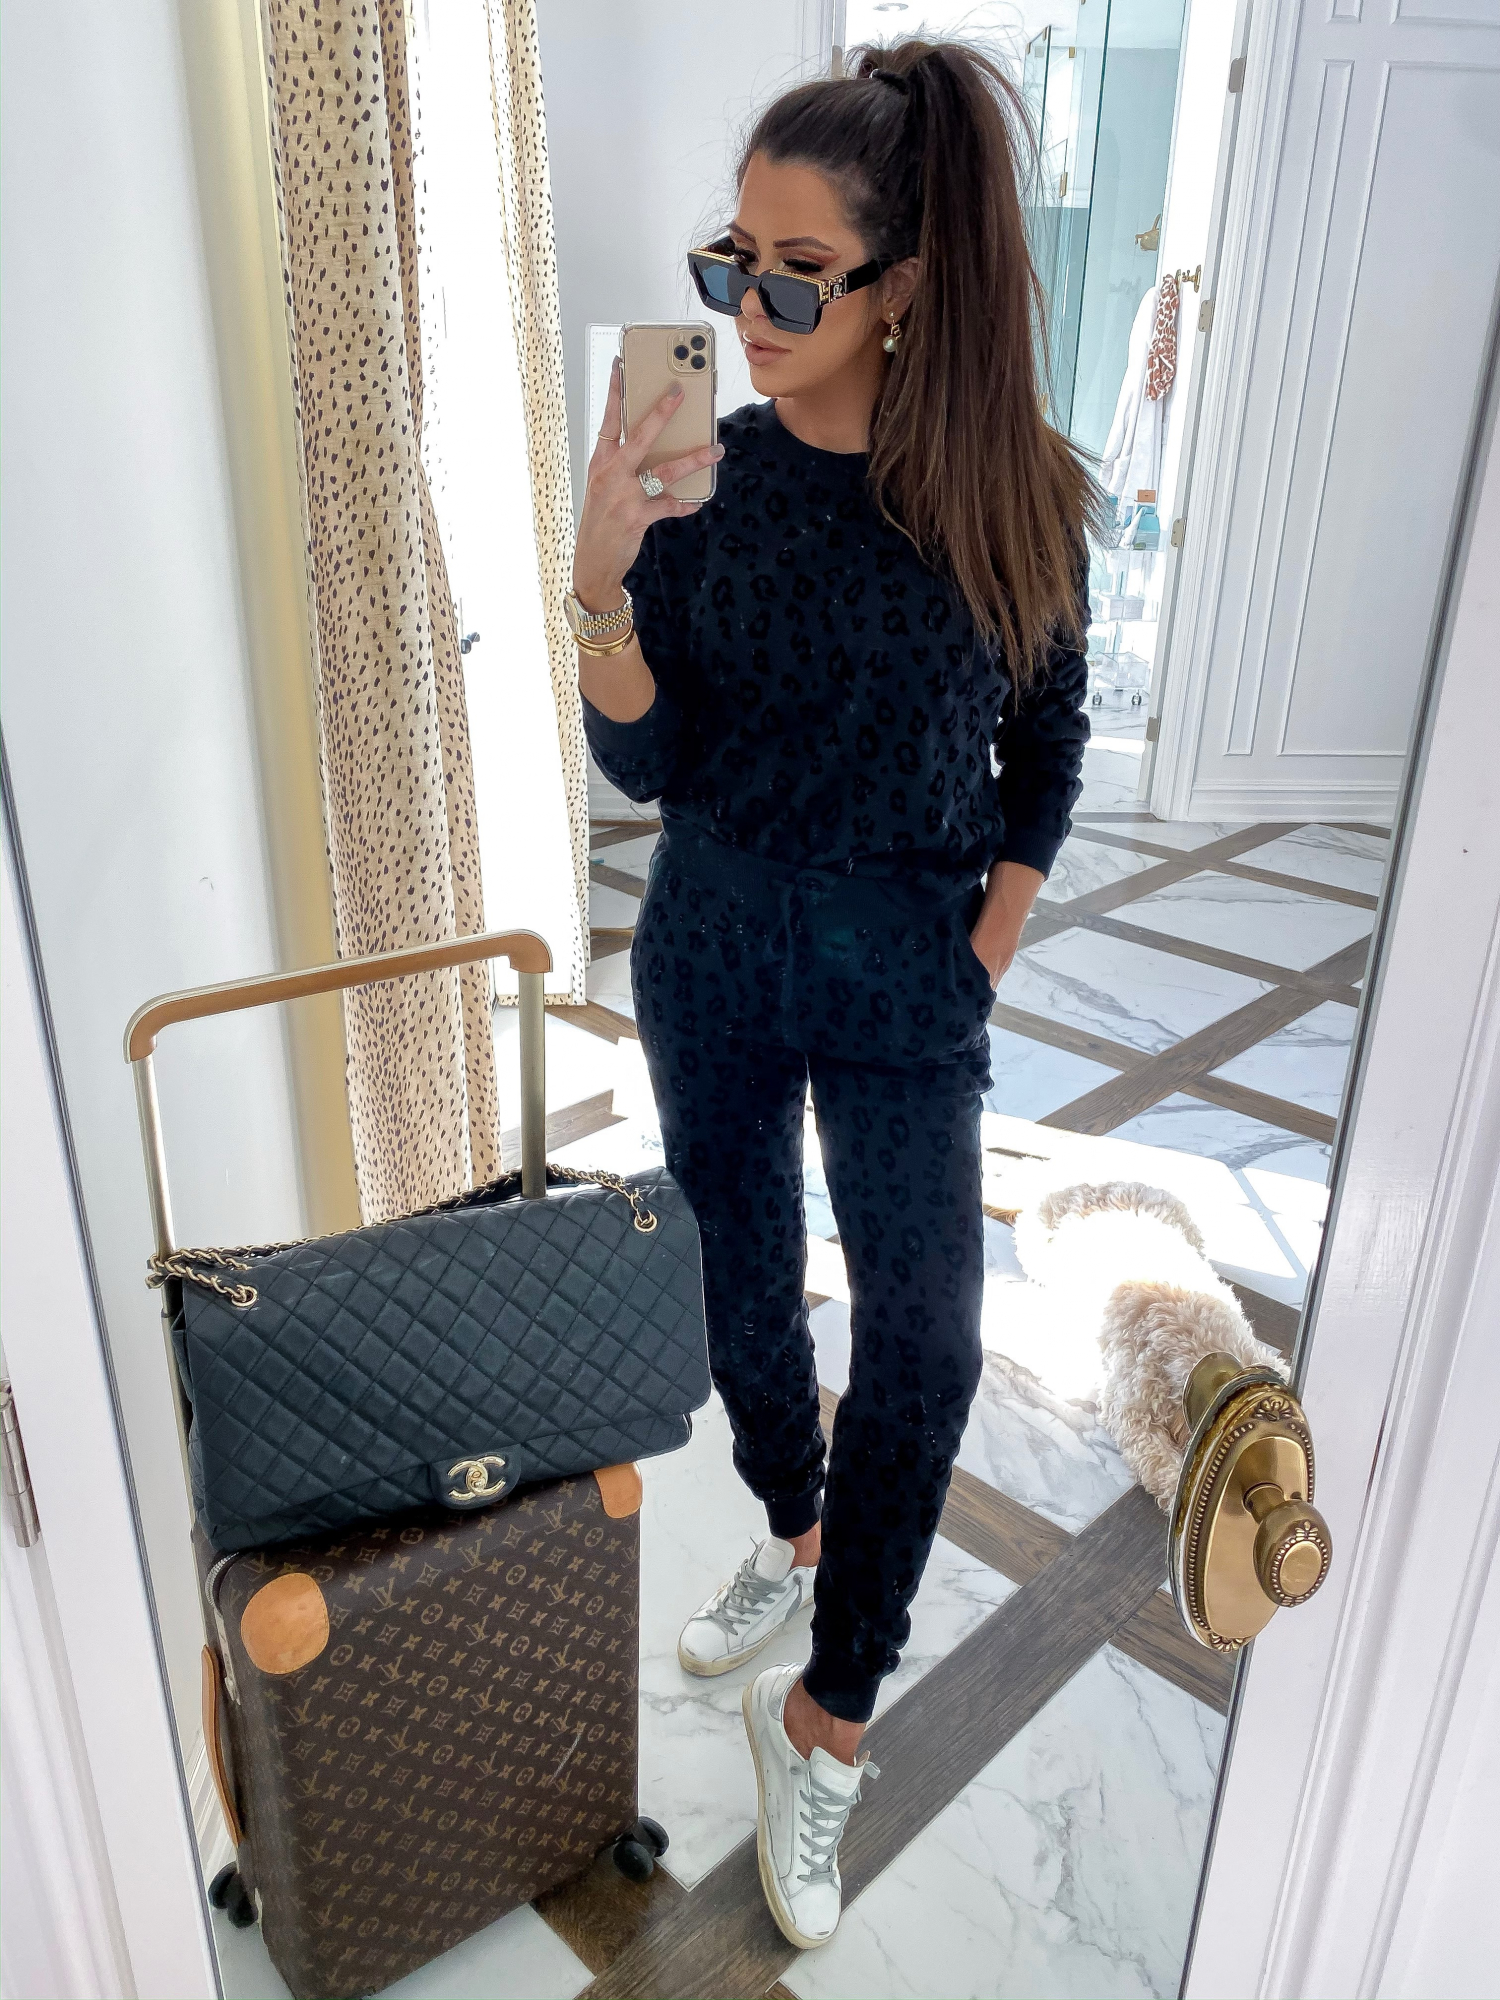 Major ShopBop Sale Alert‼️[25% Off My Most Popular Outfits!] by popular Oklahoma fashion blog, The Sweetest Thing: image of a woman wearing ShopBop black spotted sweatshirt and ShopBop black spotted joggers.